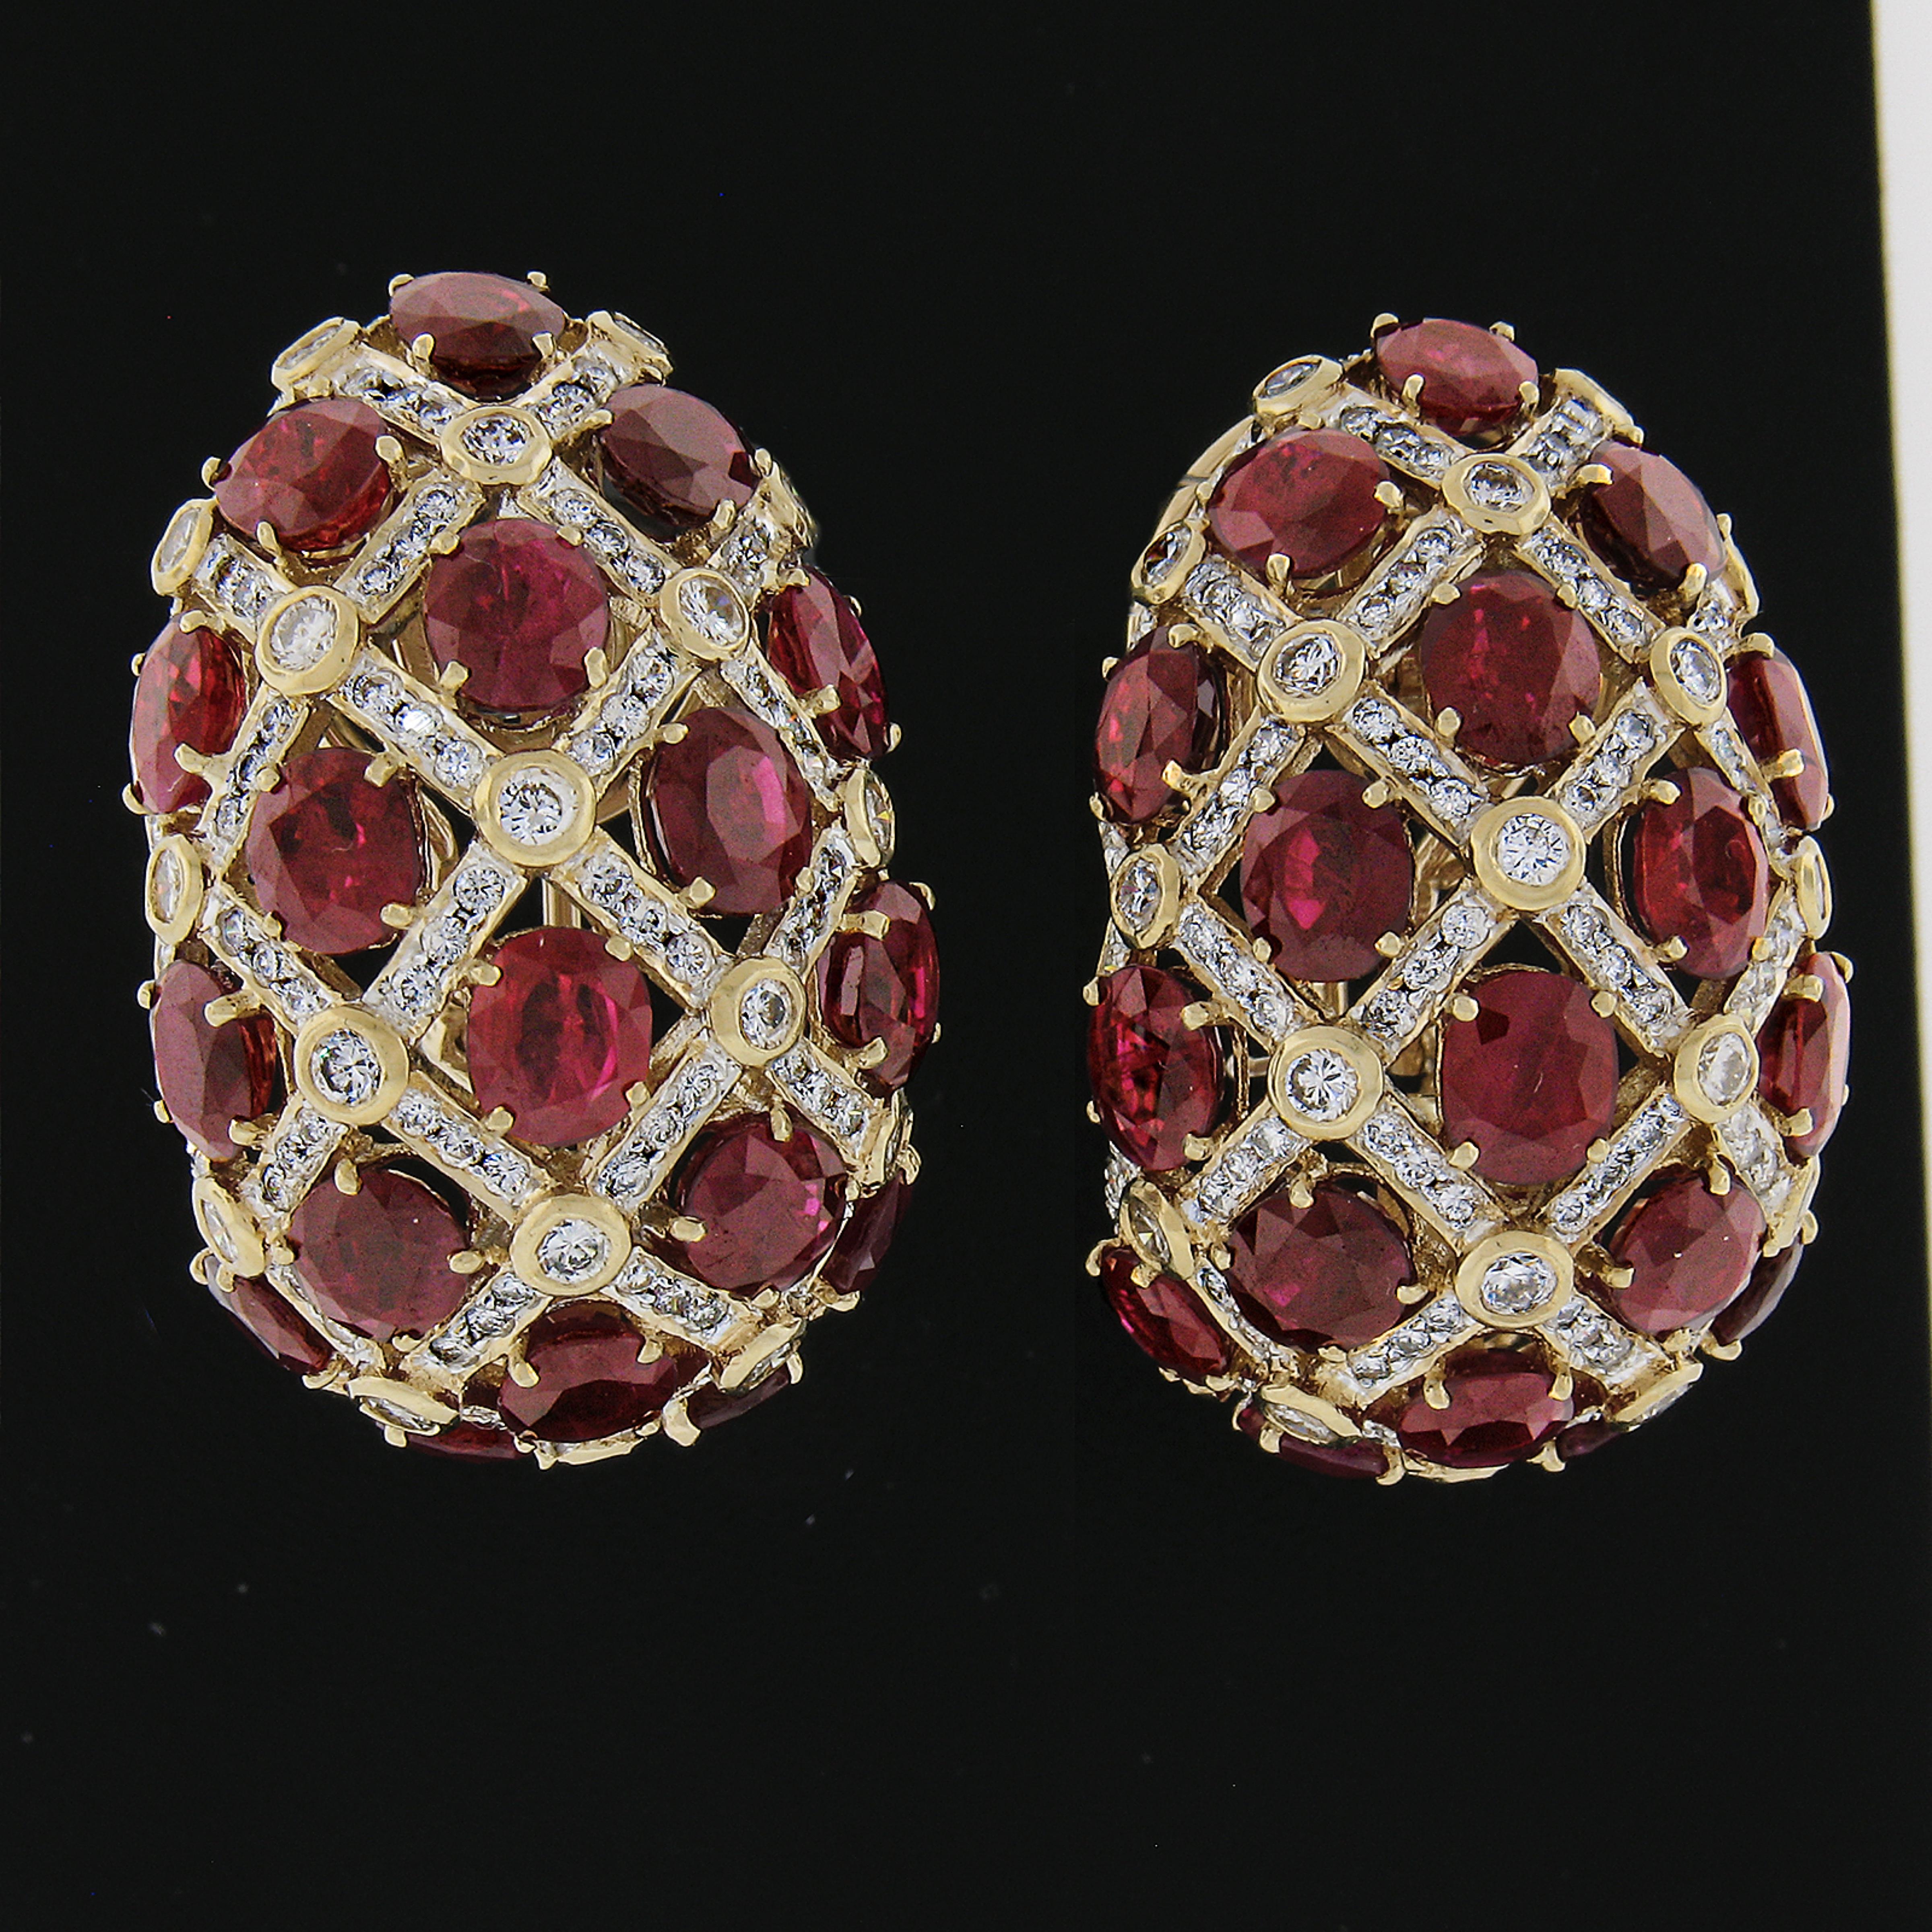 --Stone(s):--
(36) Natural Genuine Rubies - Oval Brilliant Cut - Prong Set - Vivid Red Color - Burma - Heated - Center stone weight at 0.87ct, 28-32ctw (approx. based on the certification)
** See Certification Details Below for Complete Info on the